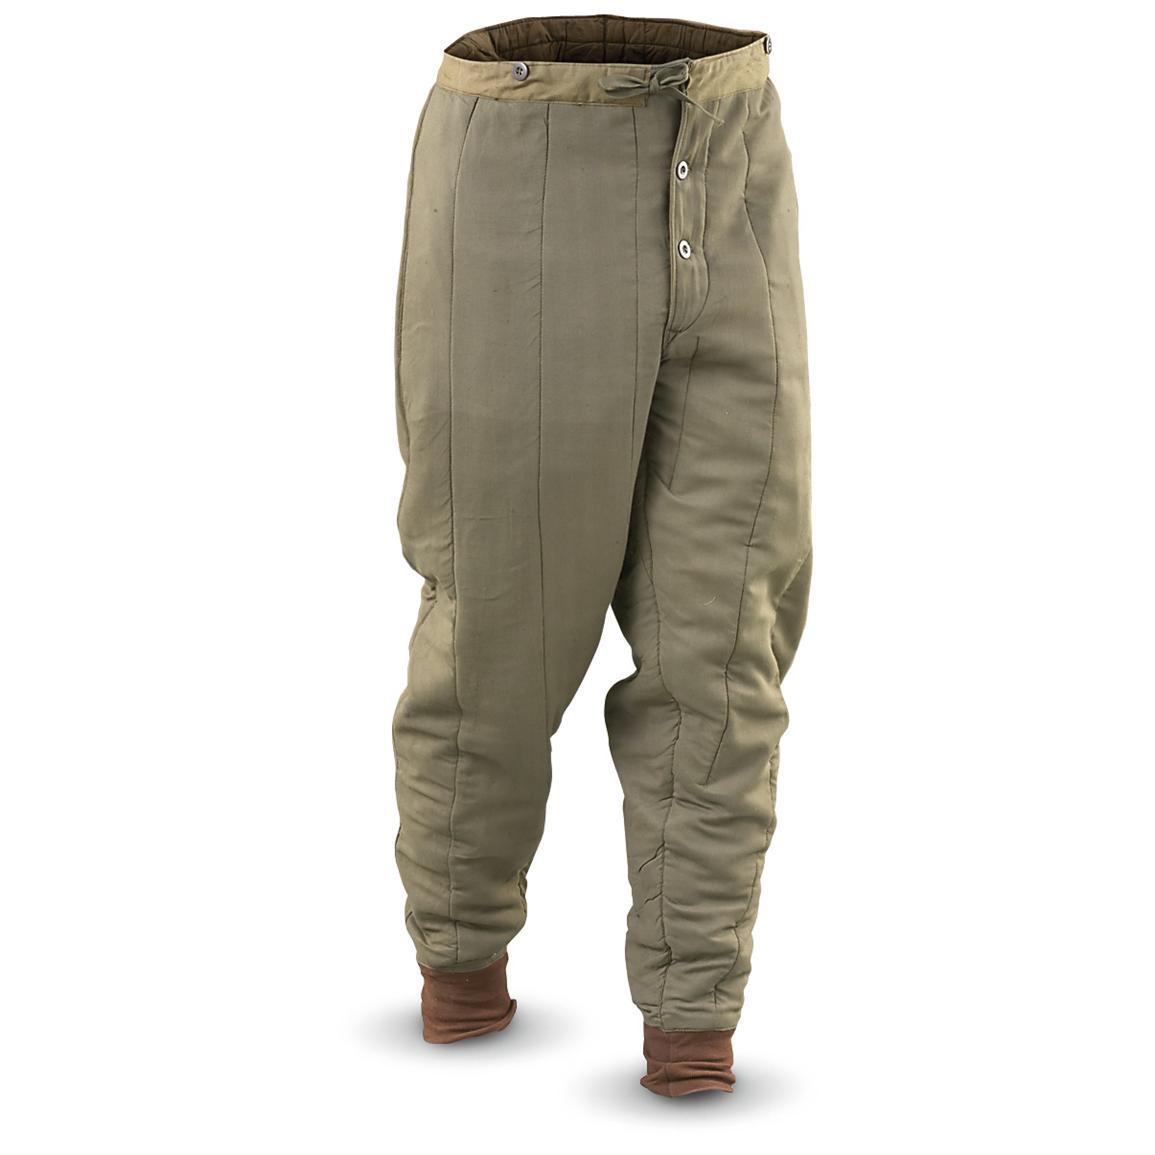 Czech Military Surplus M60 Thermal Pant Liners, 6 Pack, New - 292062 ...